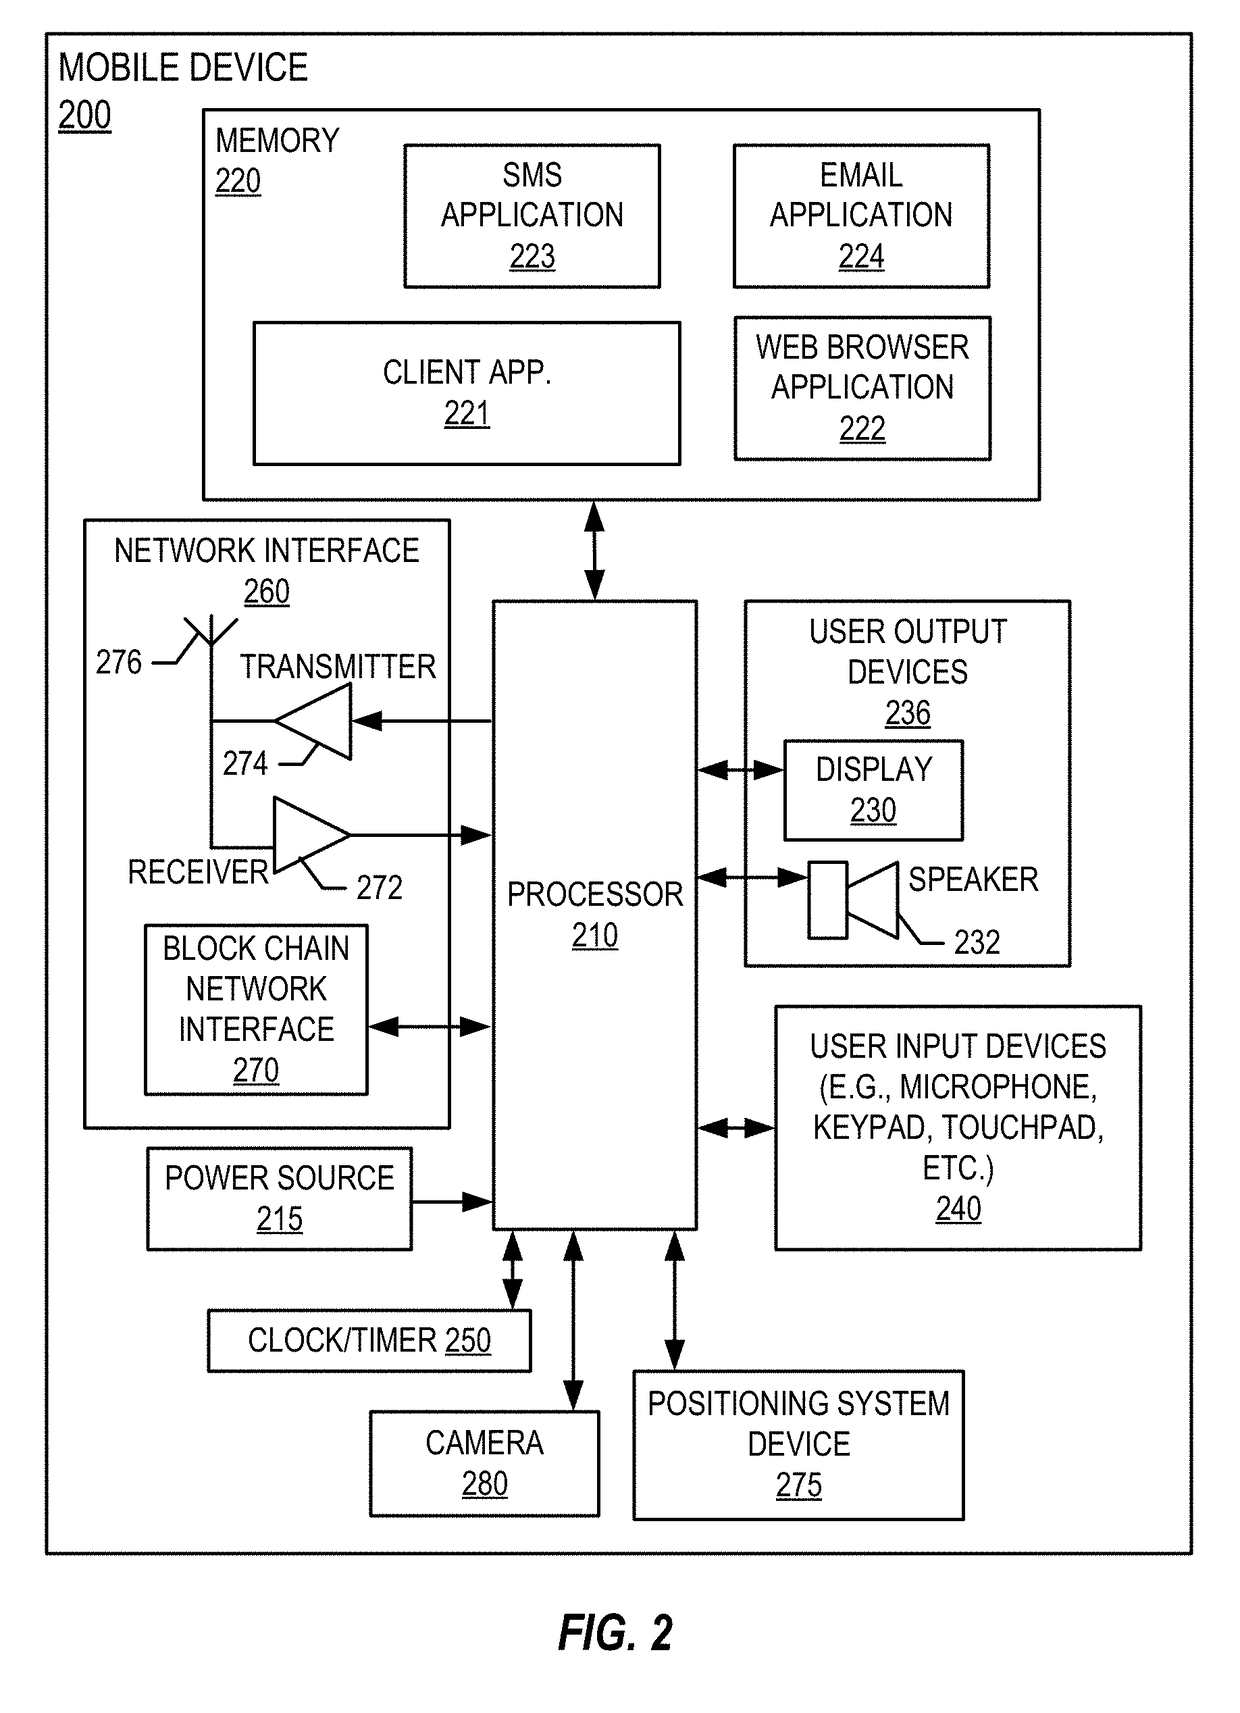 System for allowing external validation of data in a process data network